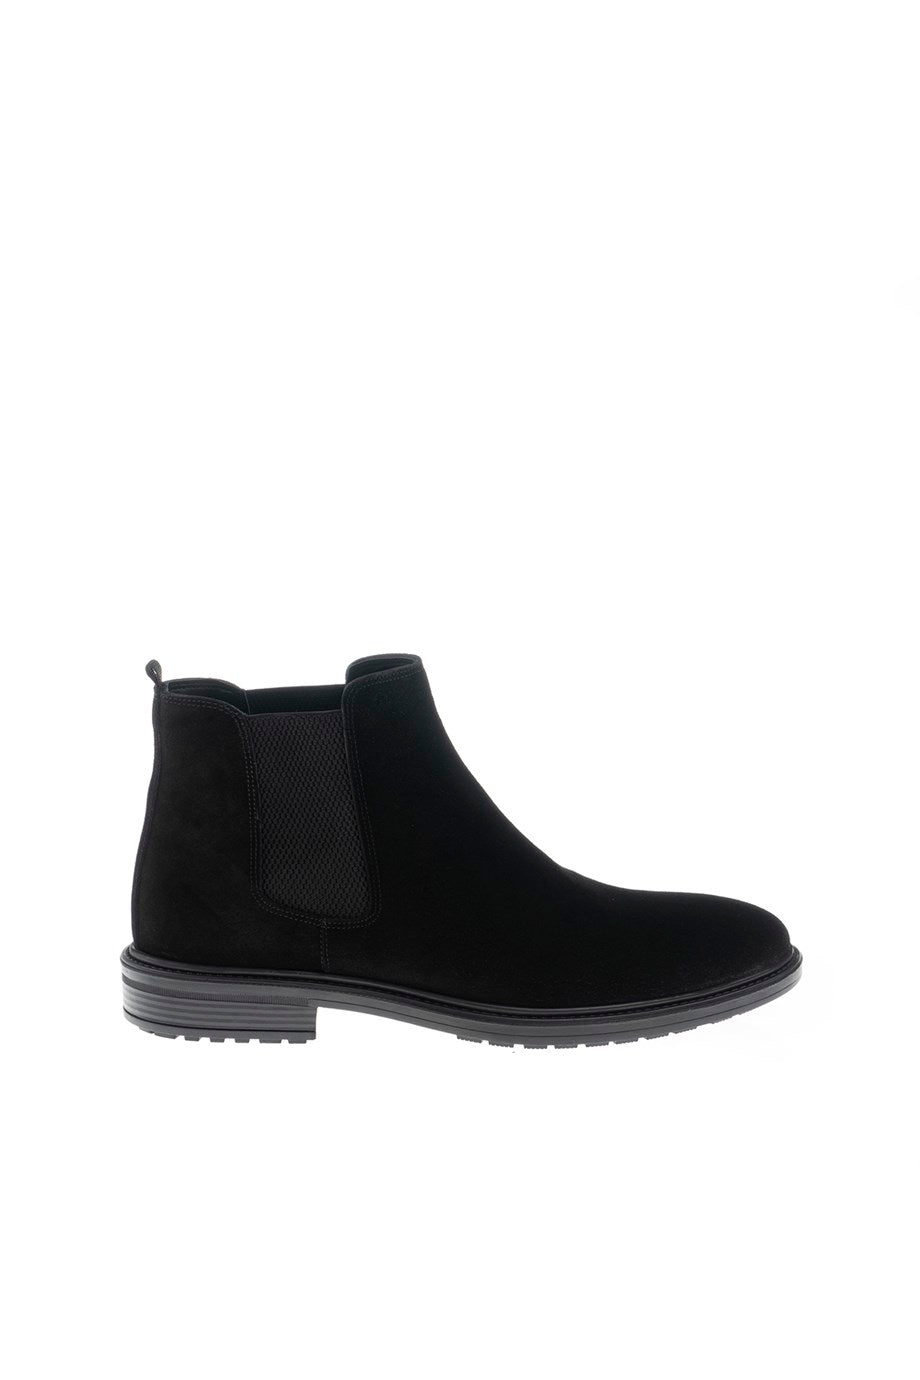 Eva Sole Genuine Suede Leather Chelsea Boots - MENSTYLEWITH